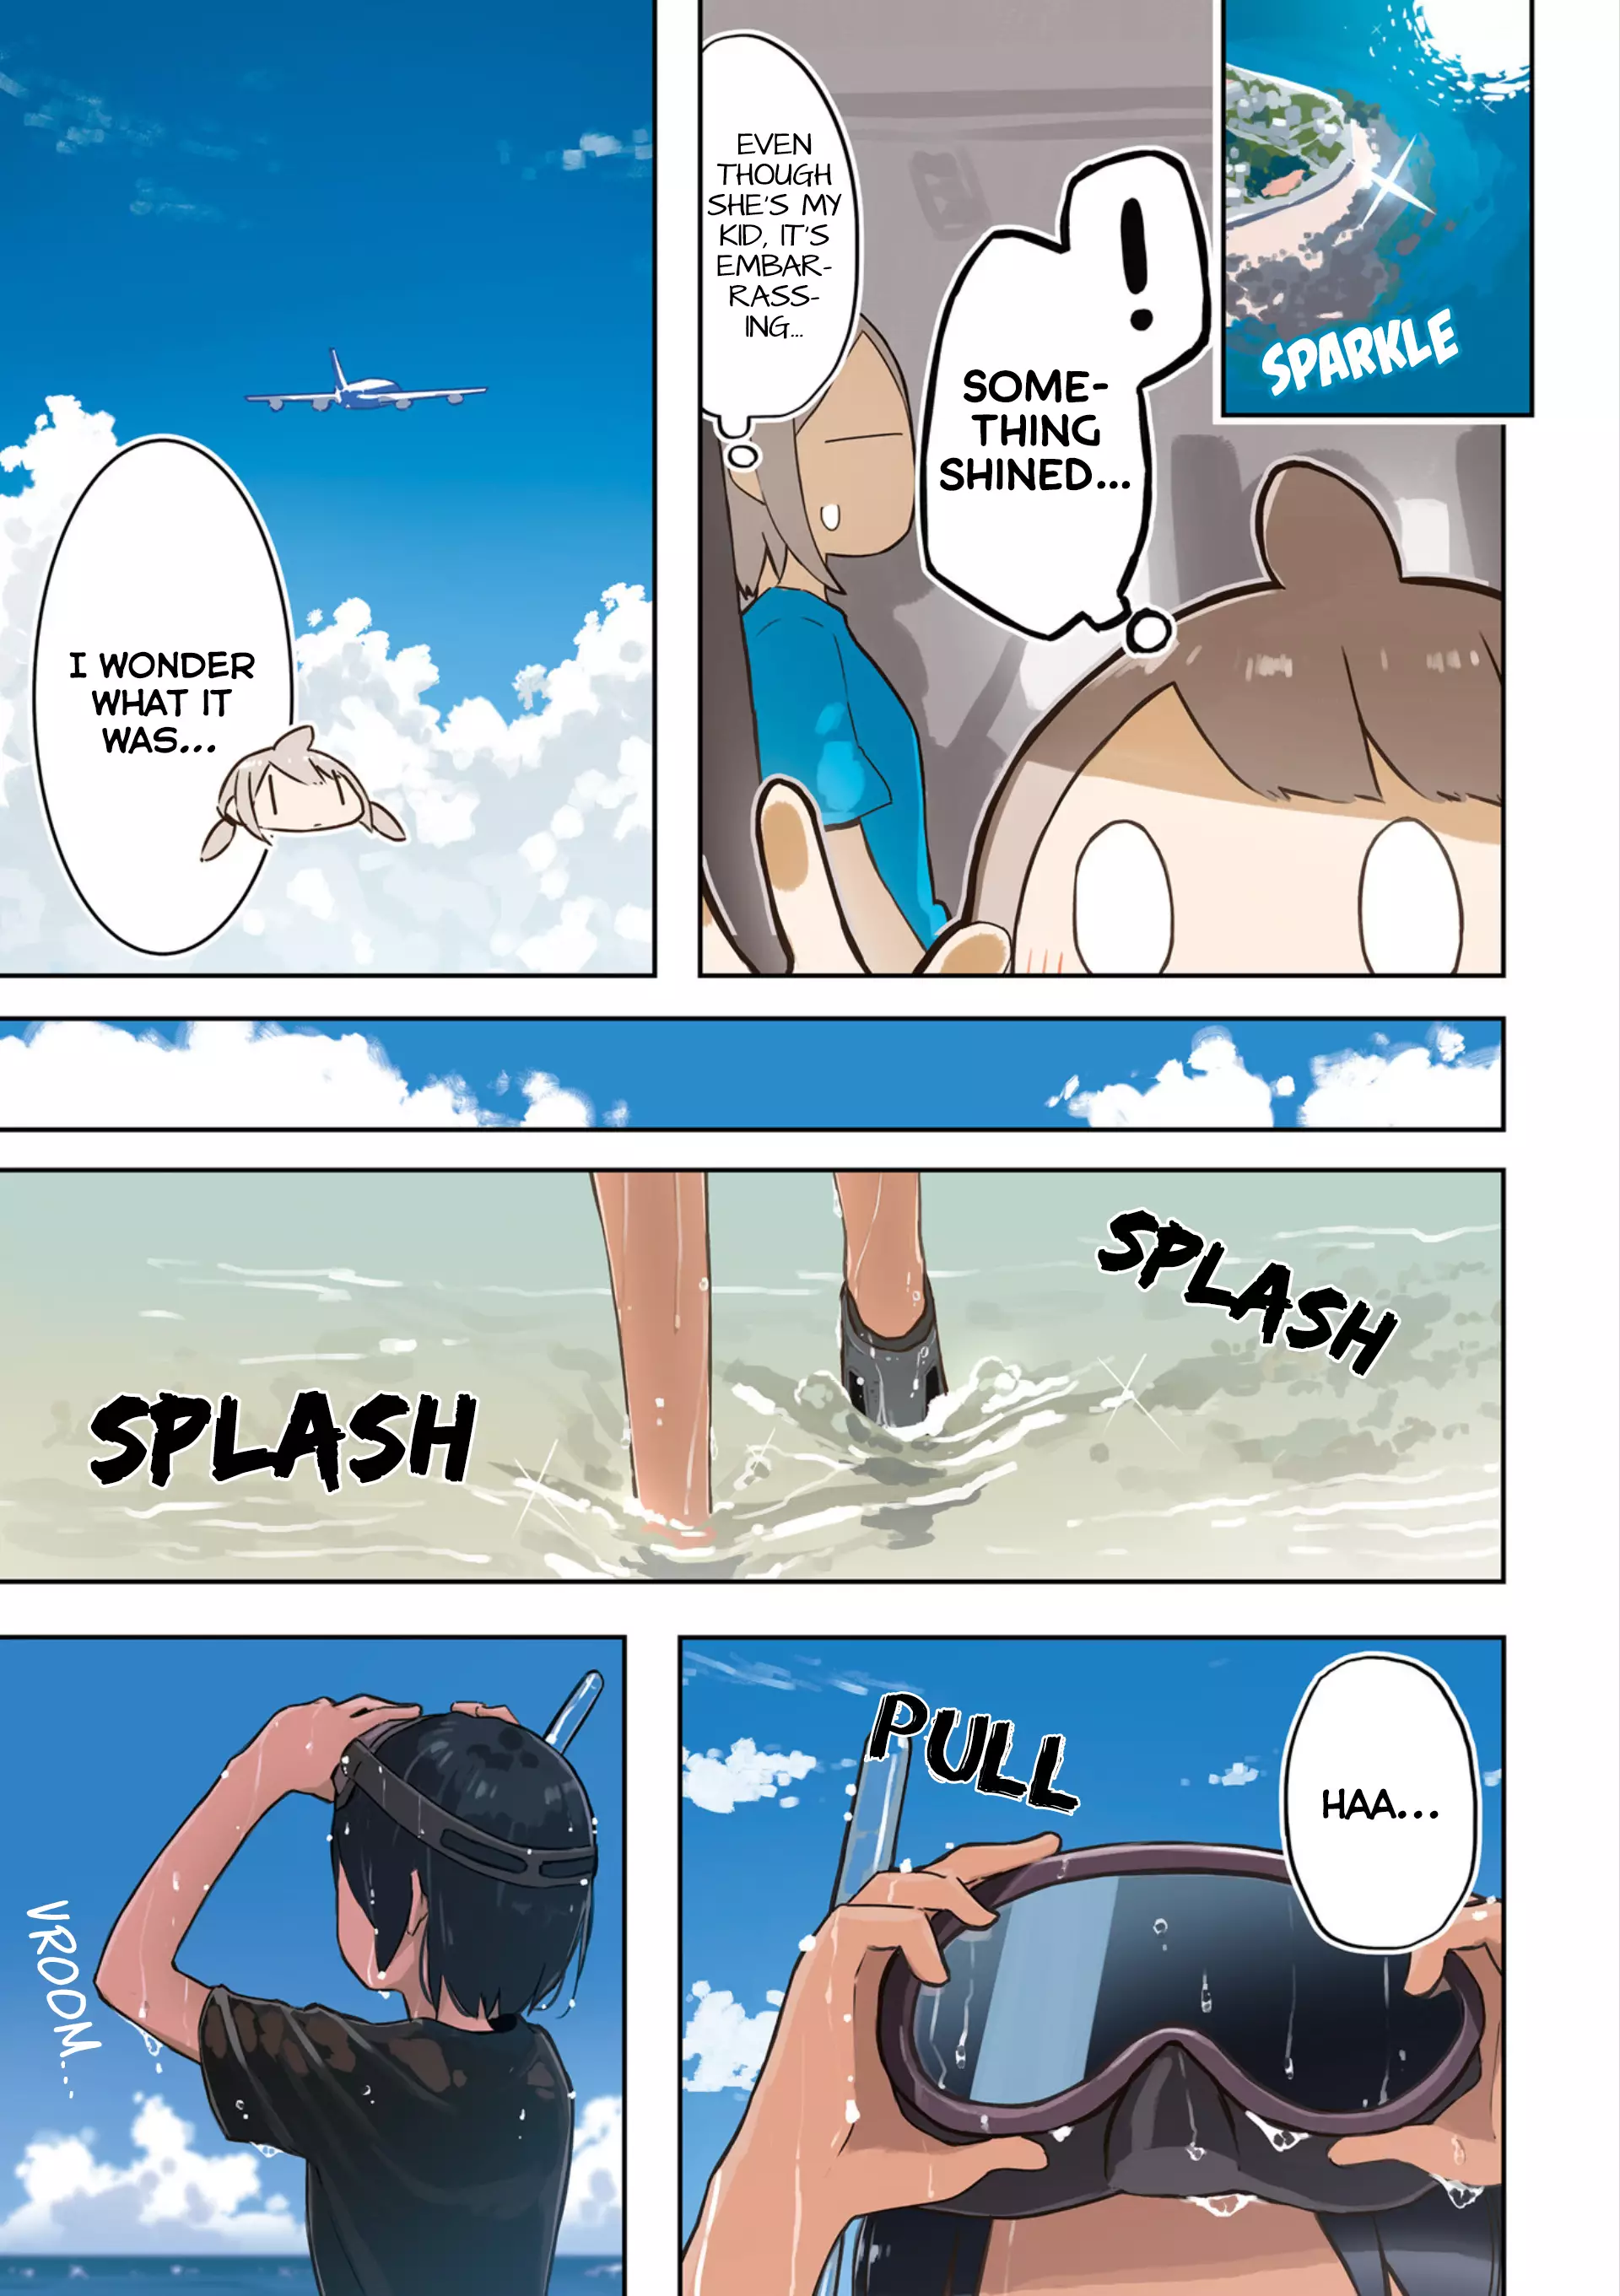 Umiiro March - 0 page 6